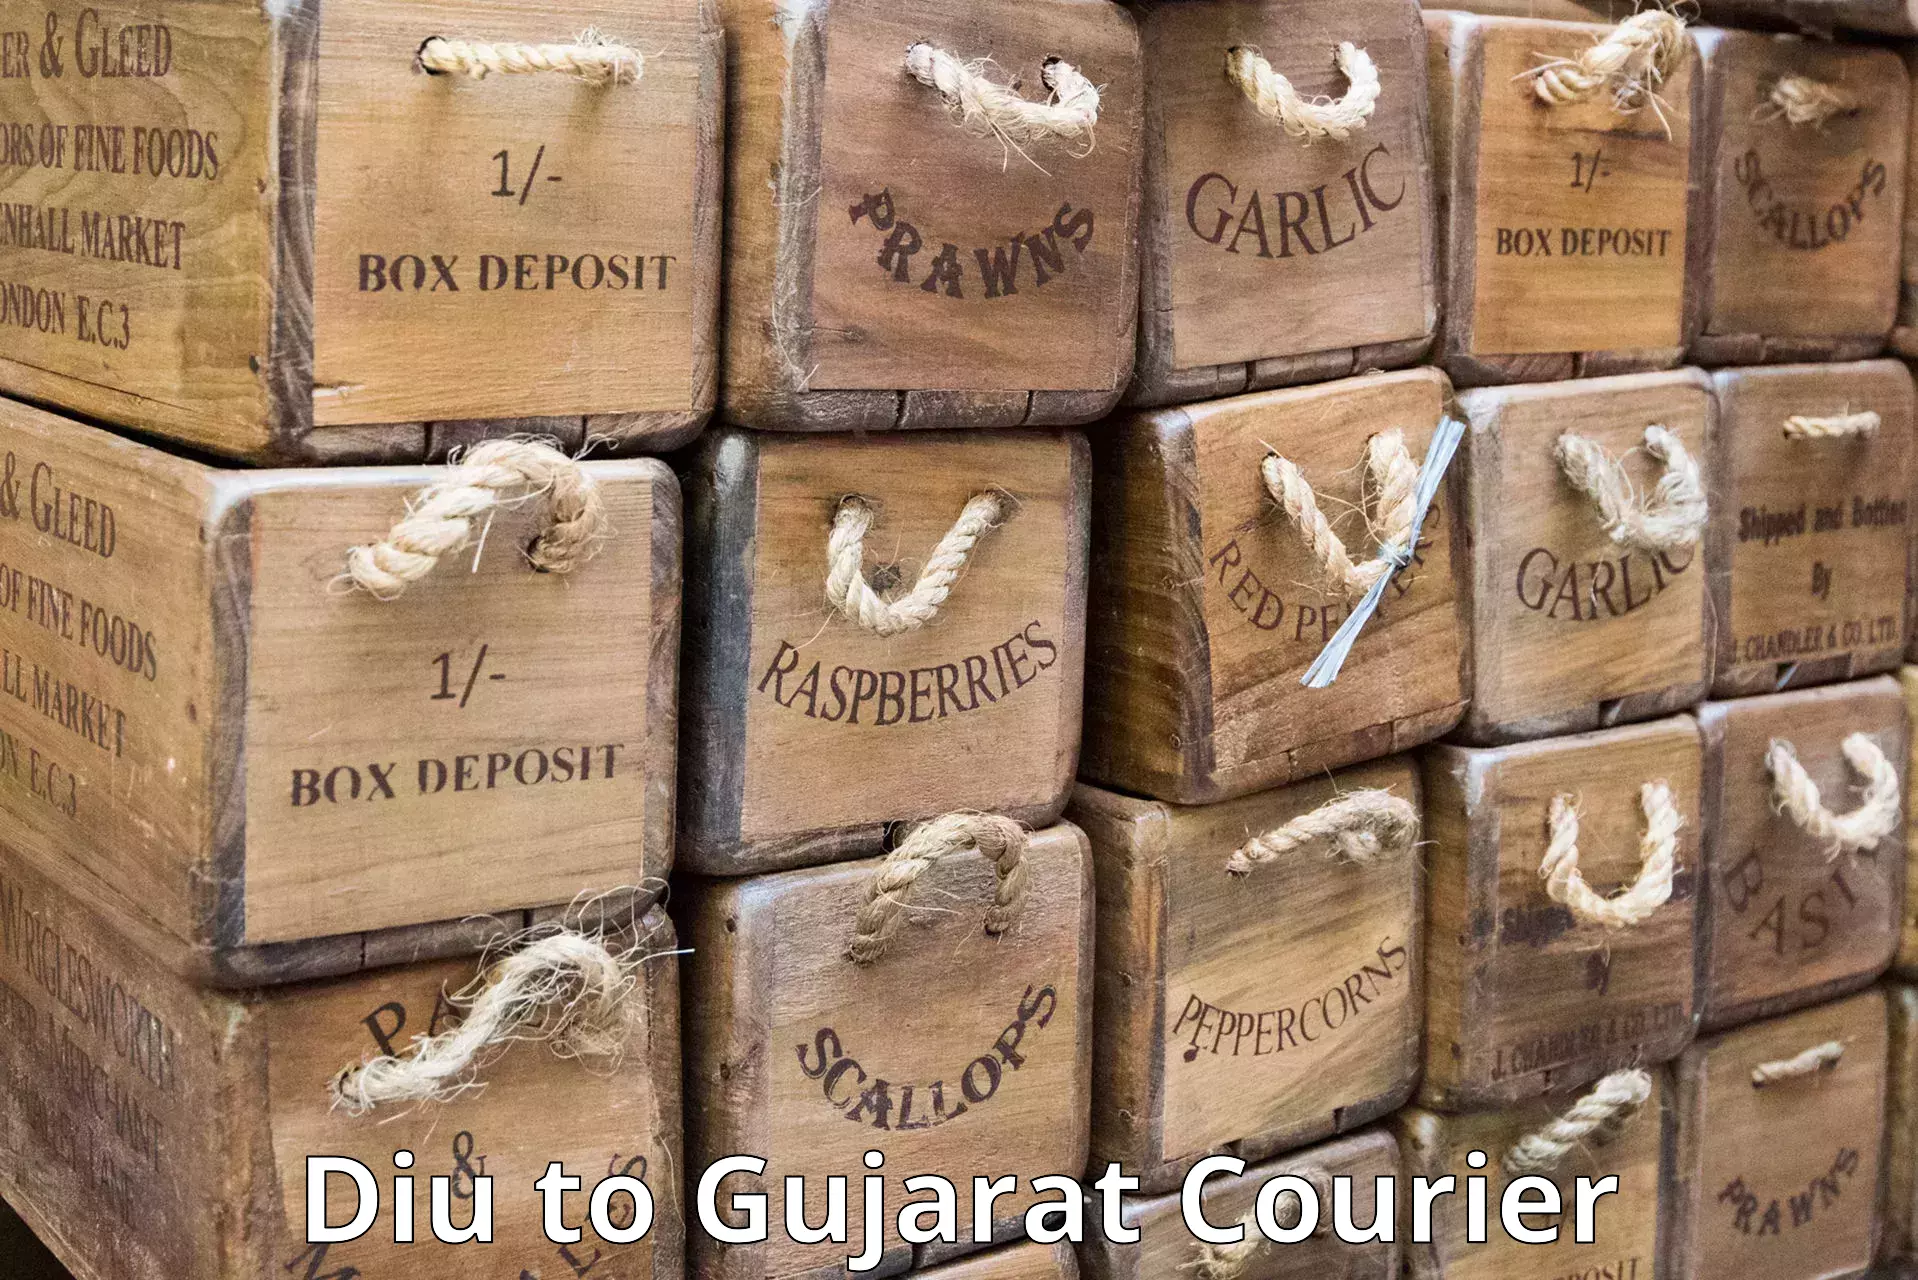 State-of-the-art courier technology Diu to Dwarka